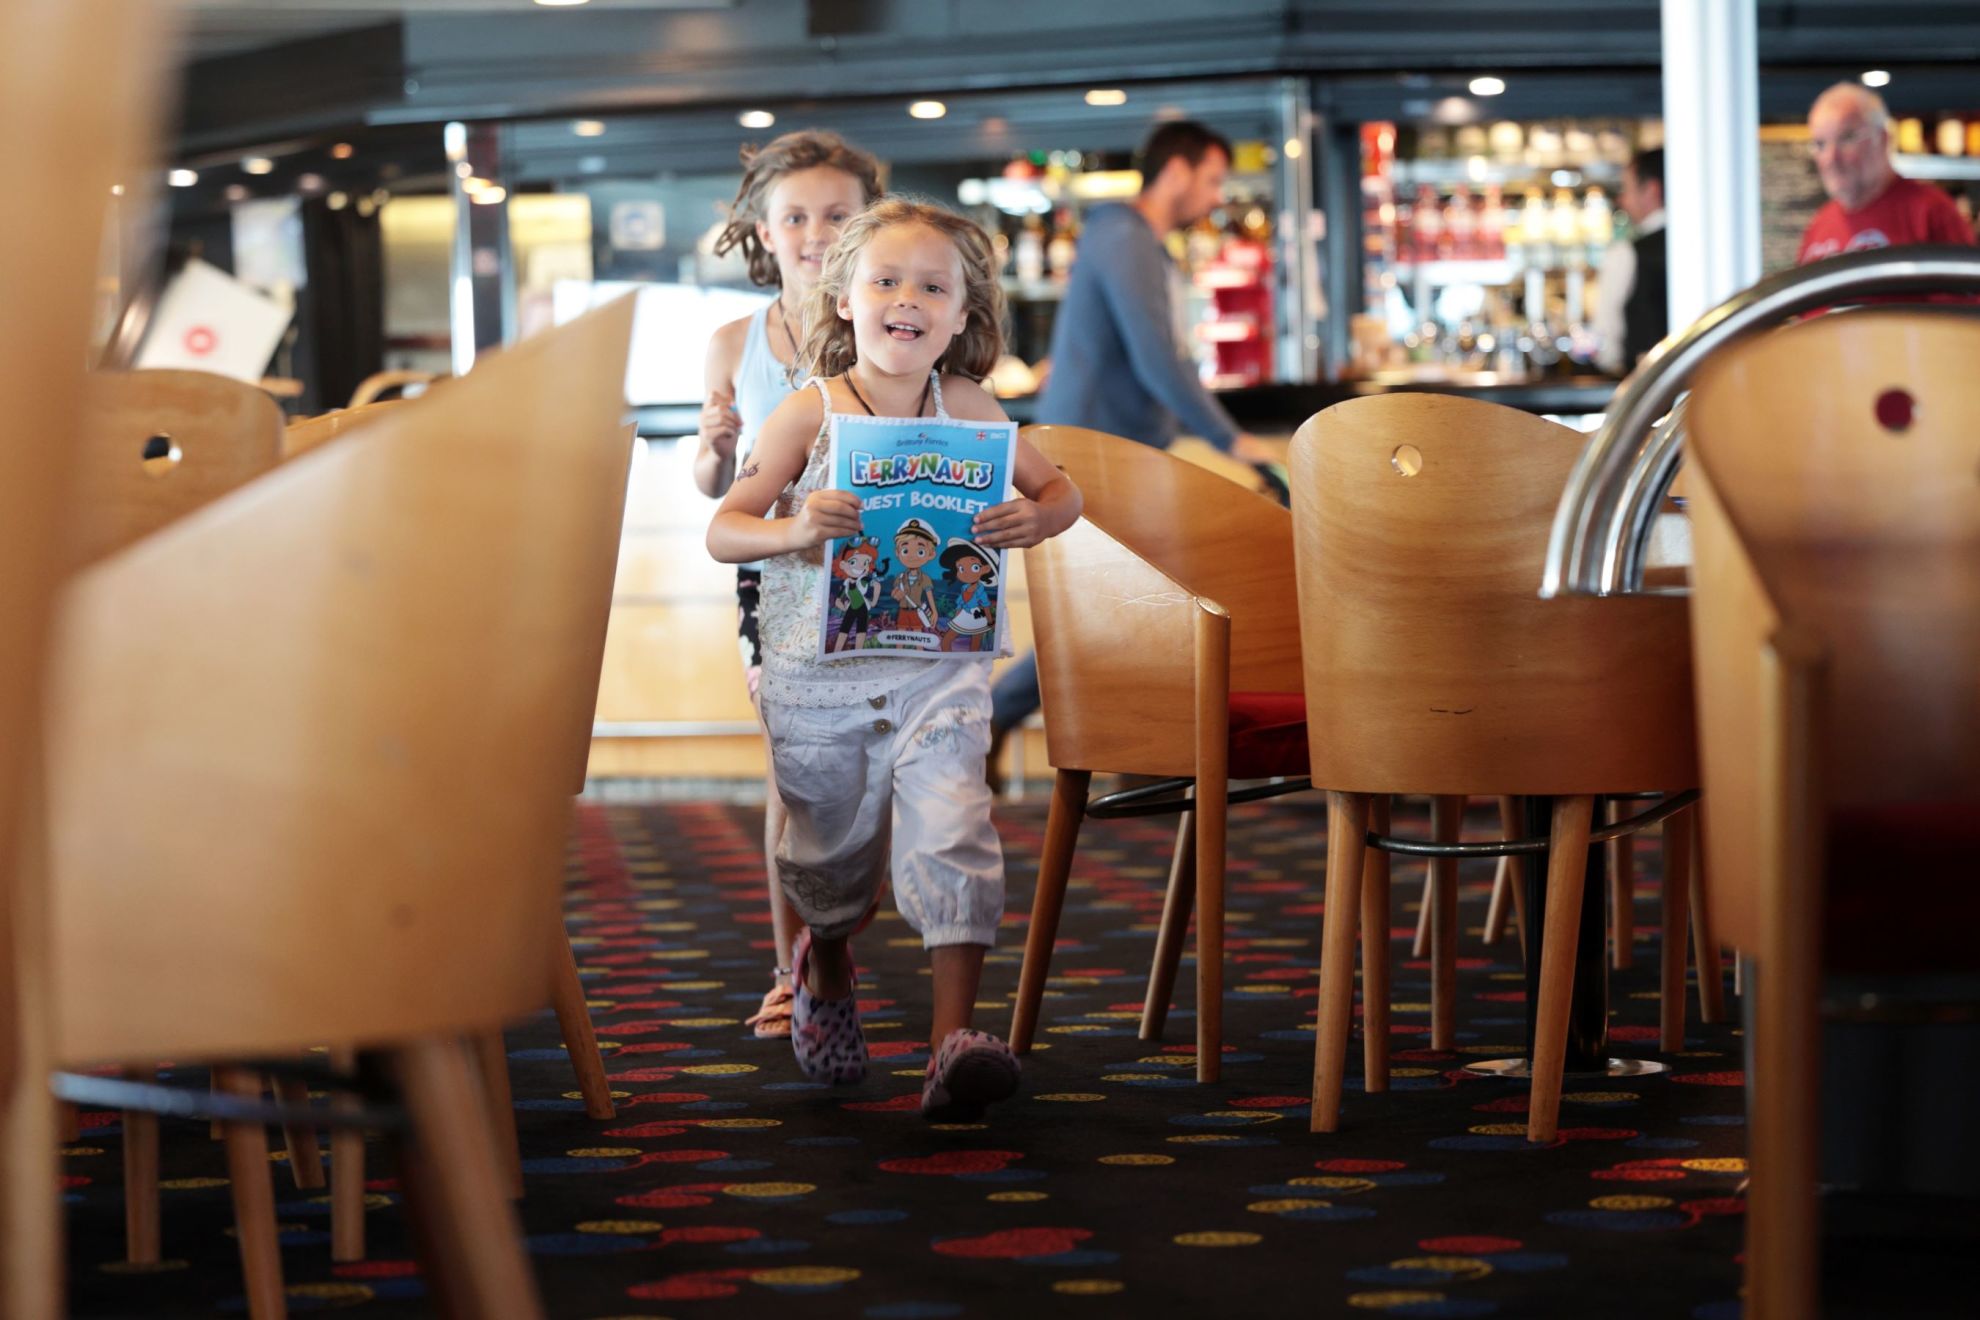 Children in the bar with Ferrynauts booklet